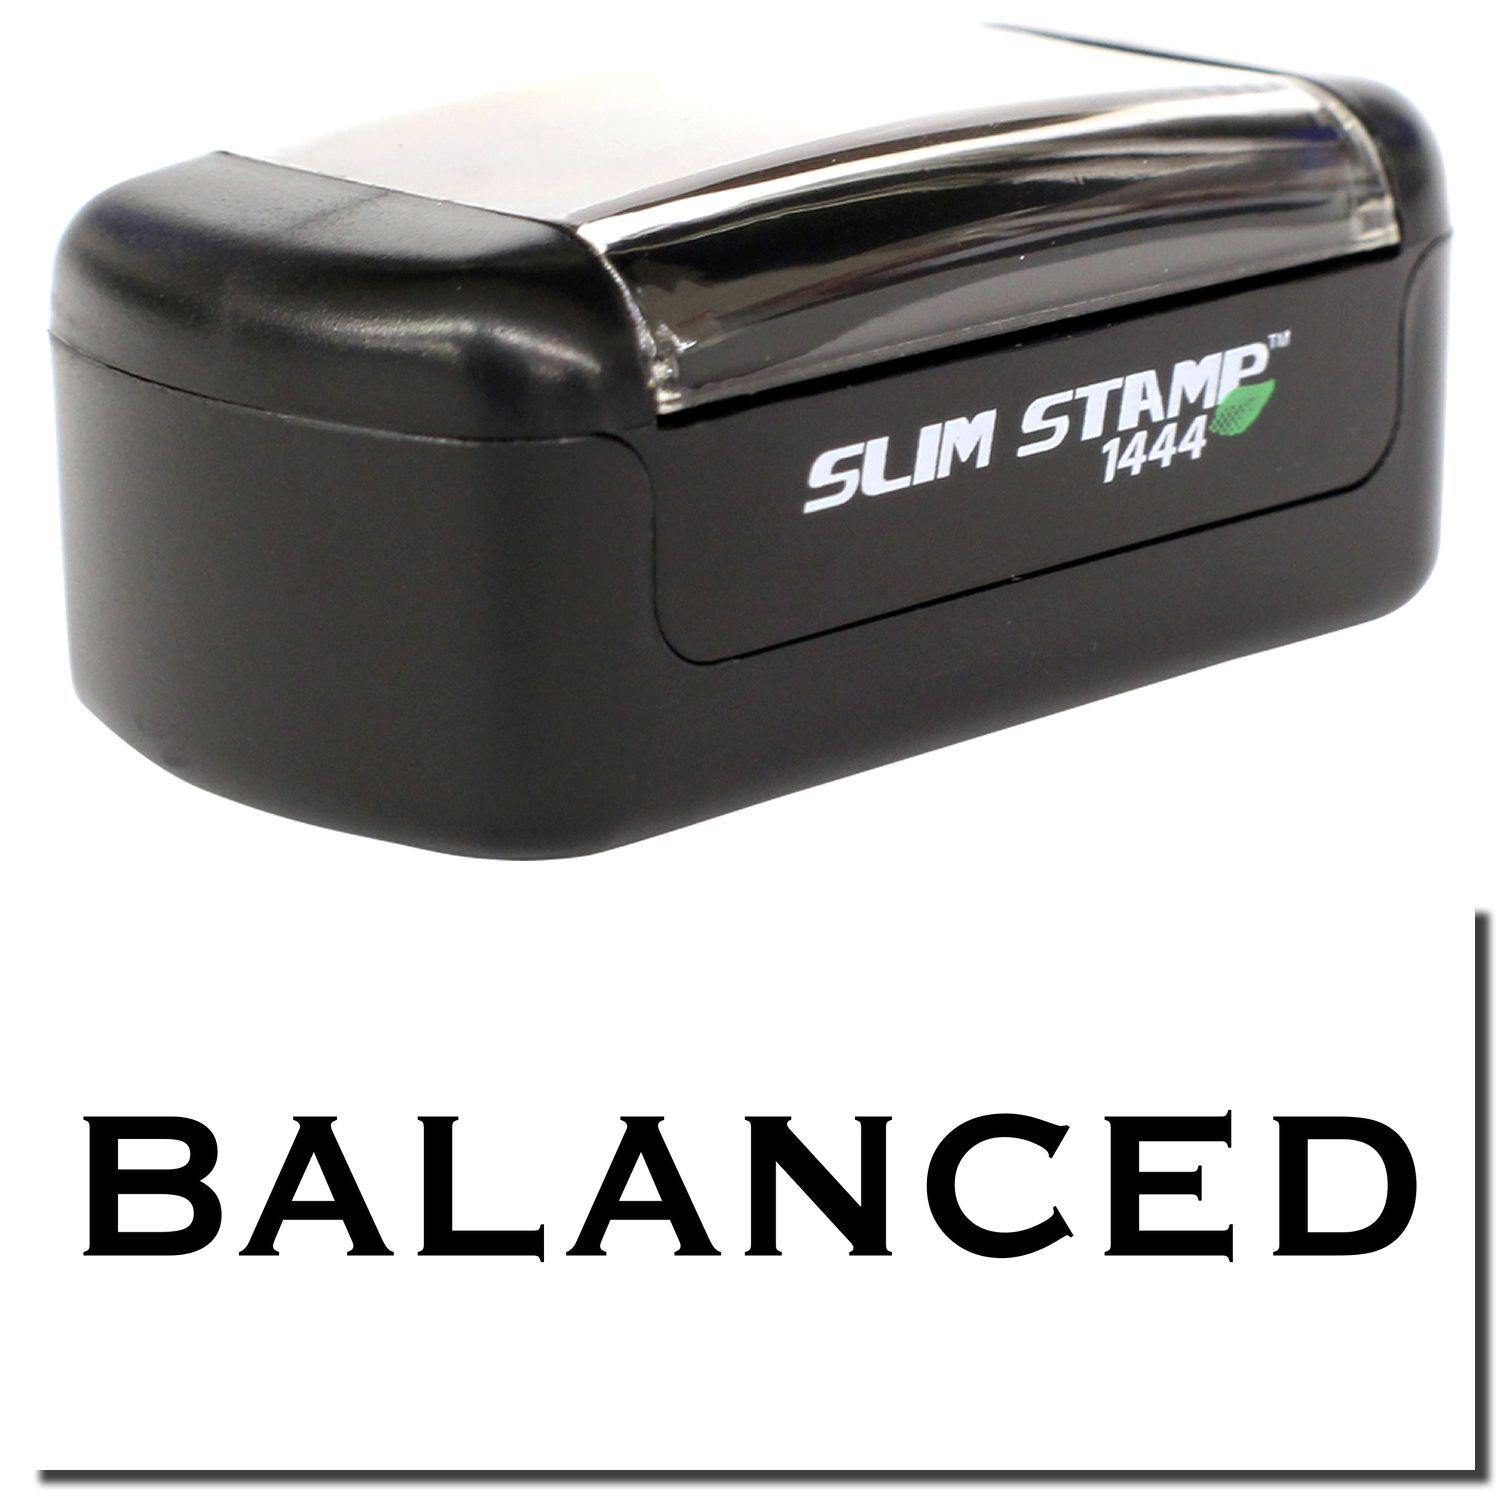 A stock office pre-inked stamp with a stamped image showing how the text "BALANCED" is displayed after stamping.